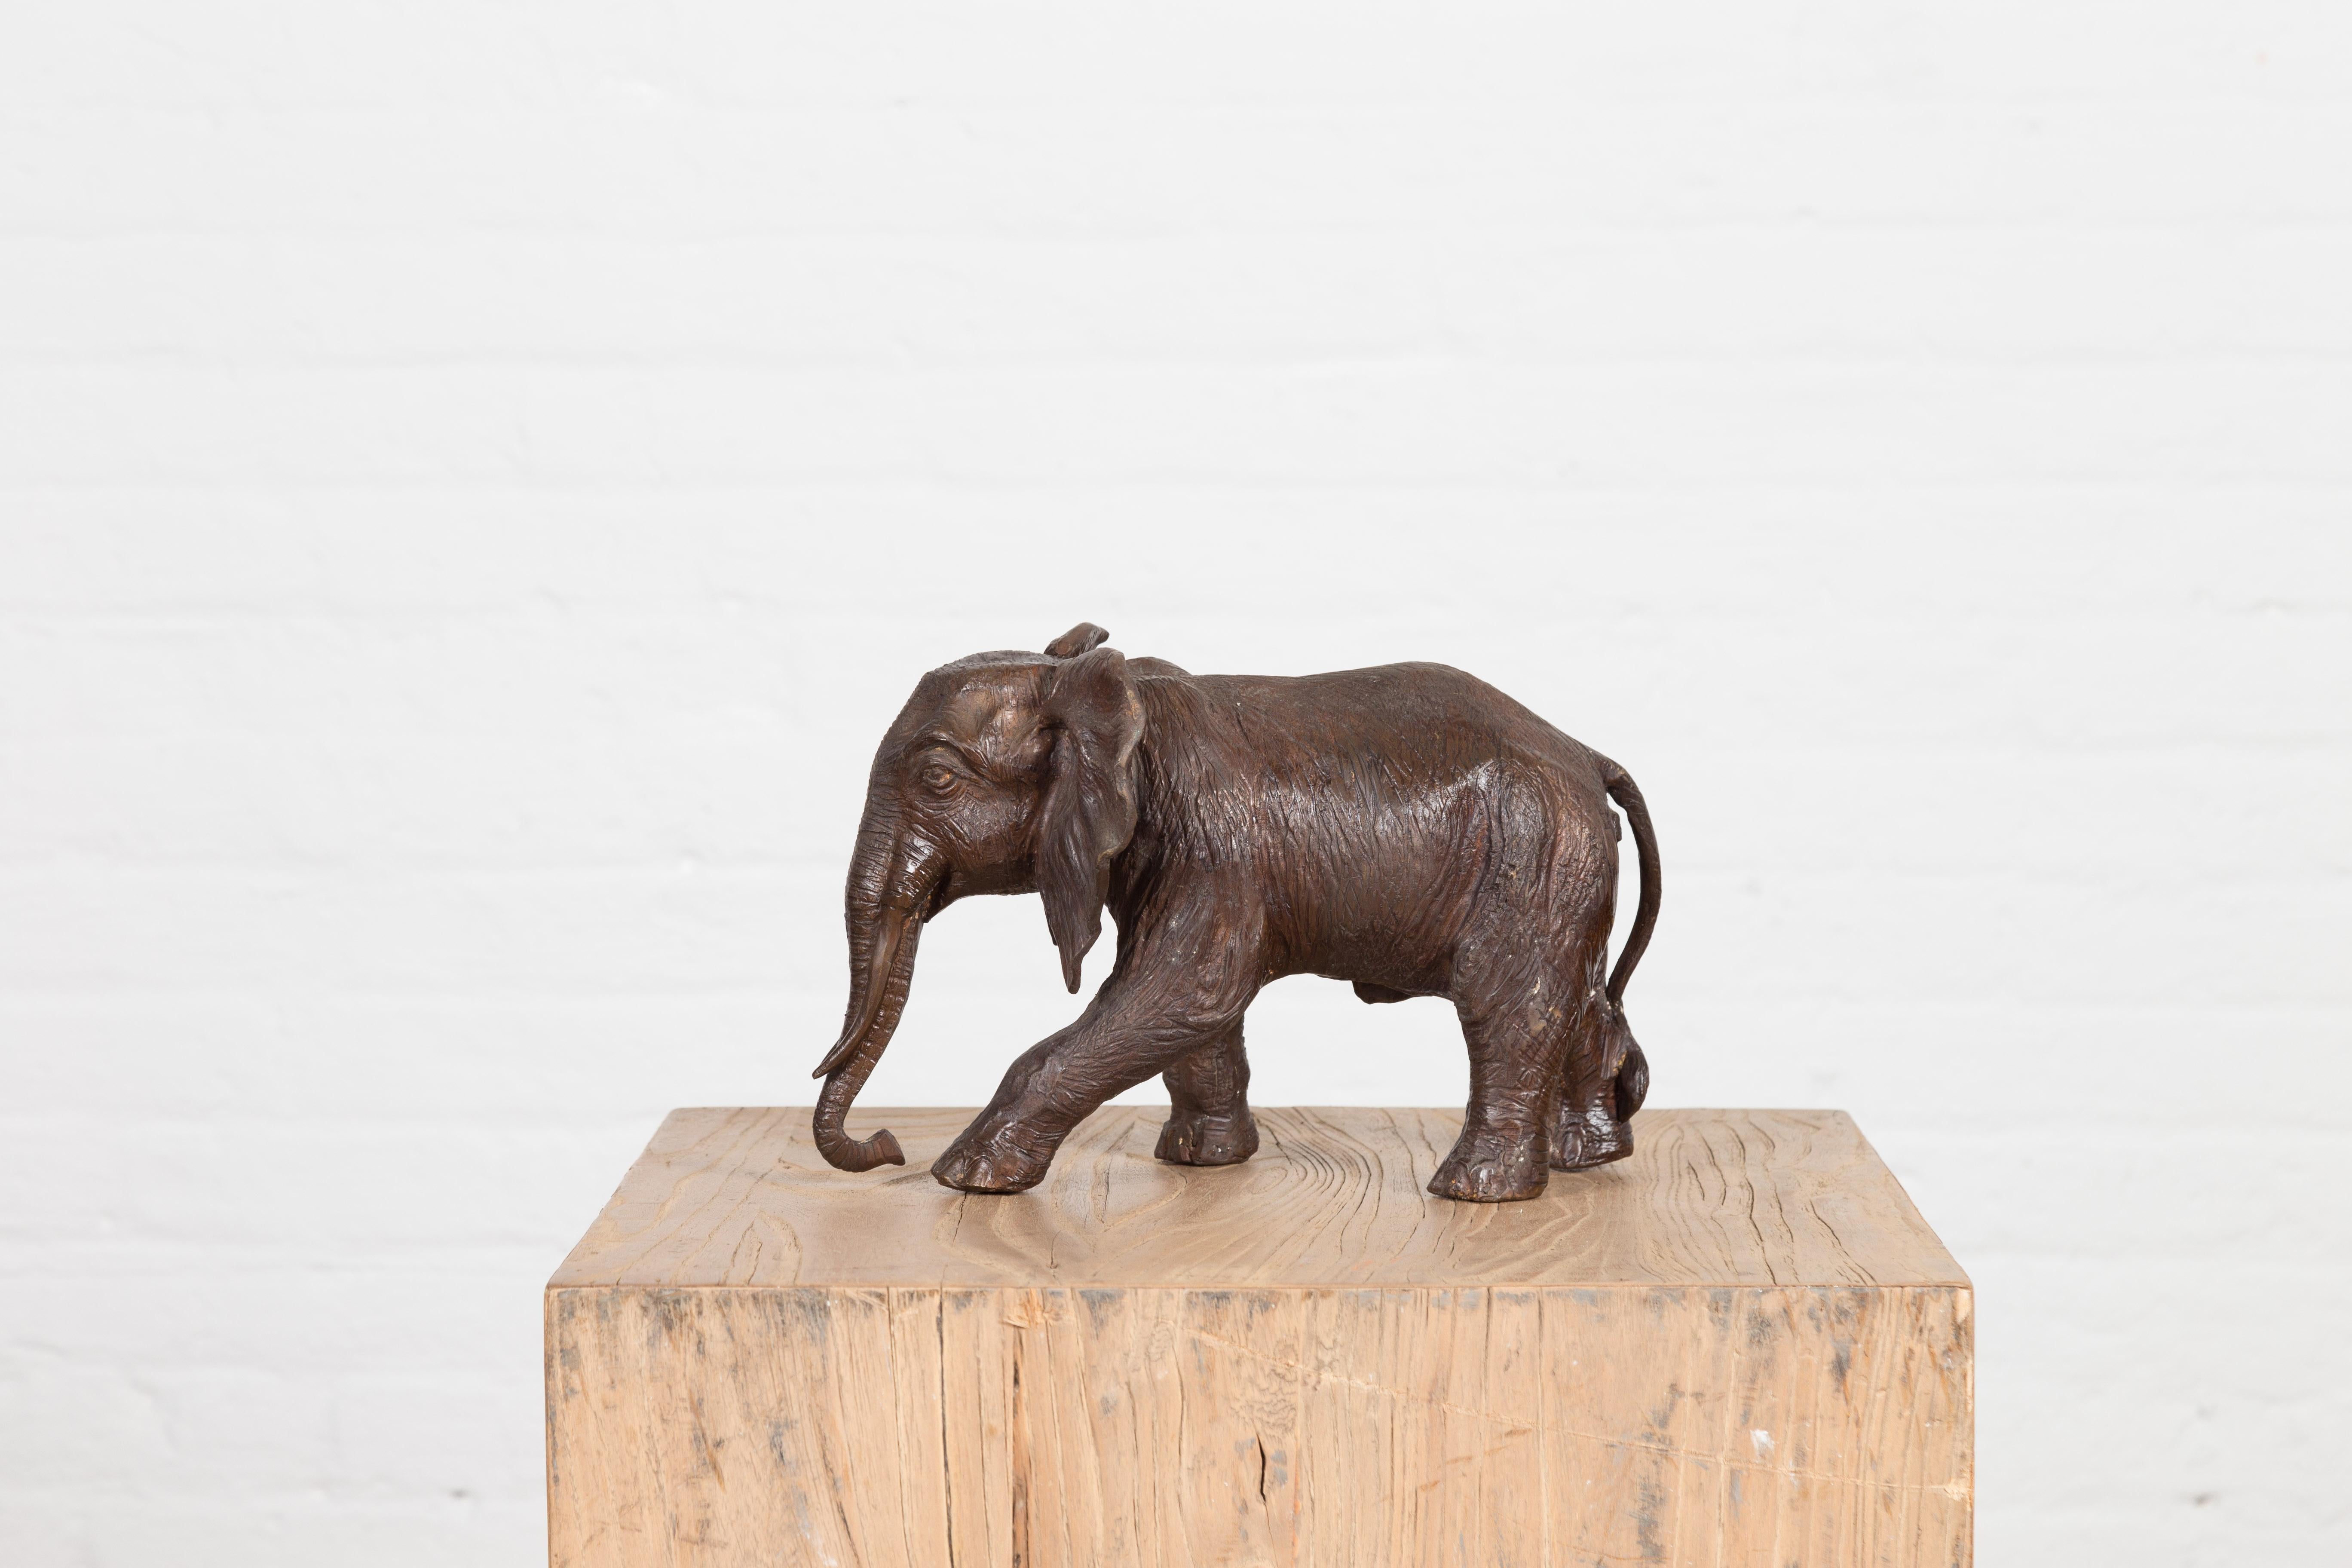 A lost wax cast bronze sculpture depicting a walking baby elephant in dark patina. Created with the traditional technique of the lost-wax (à la cire perdue) which allows for great precision and finesse in the details, this bronze statue depicts a